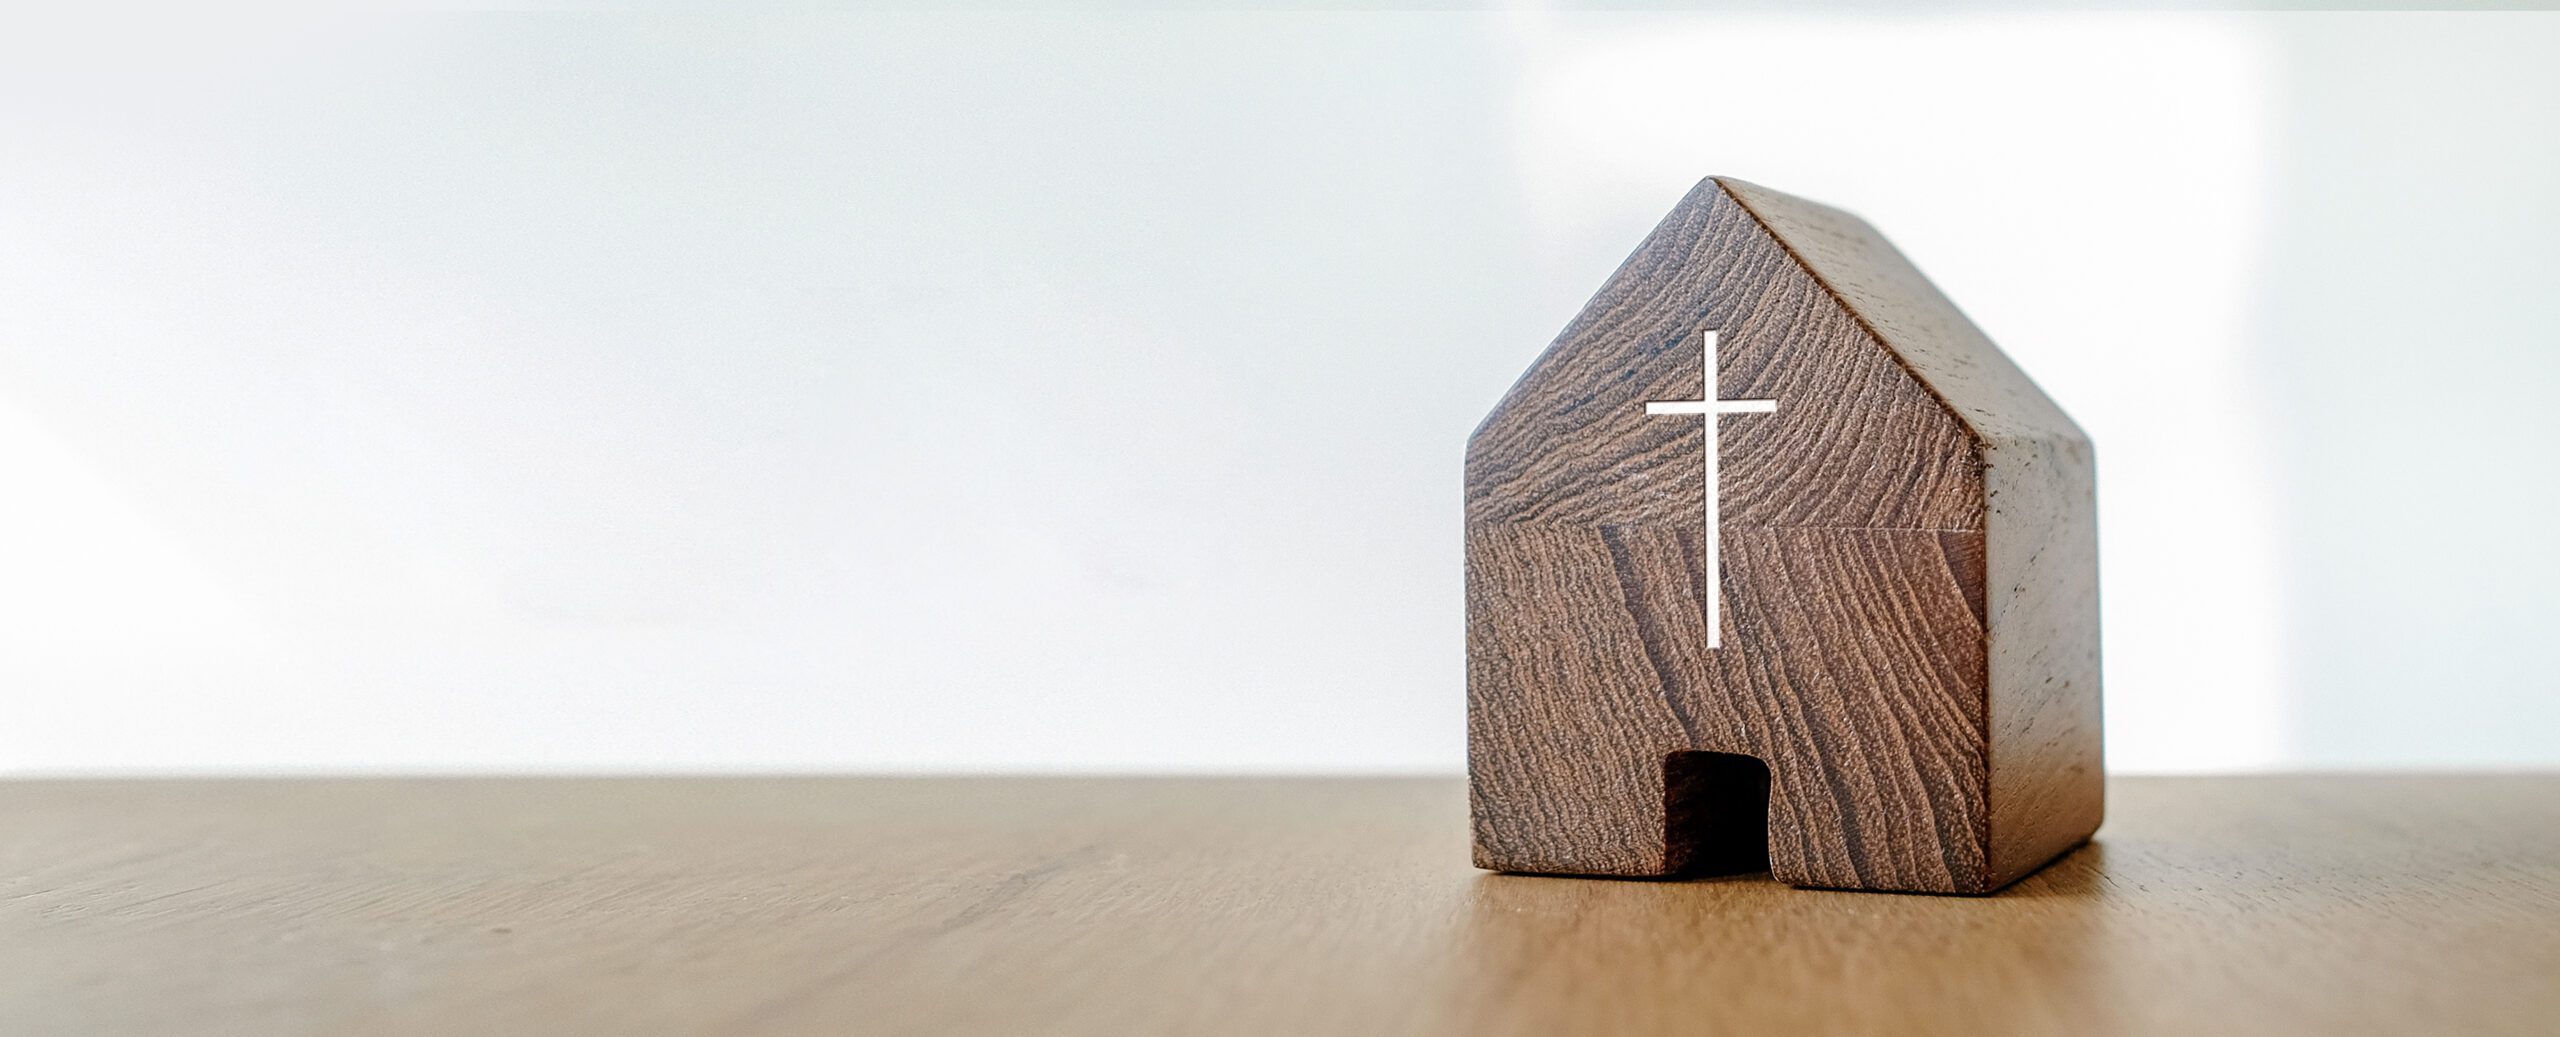 A small wooden block with a door cut out and a silver cross to make it resemble a church.